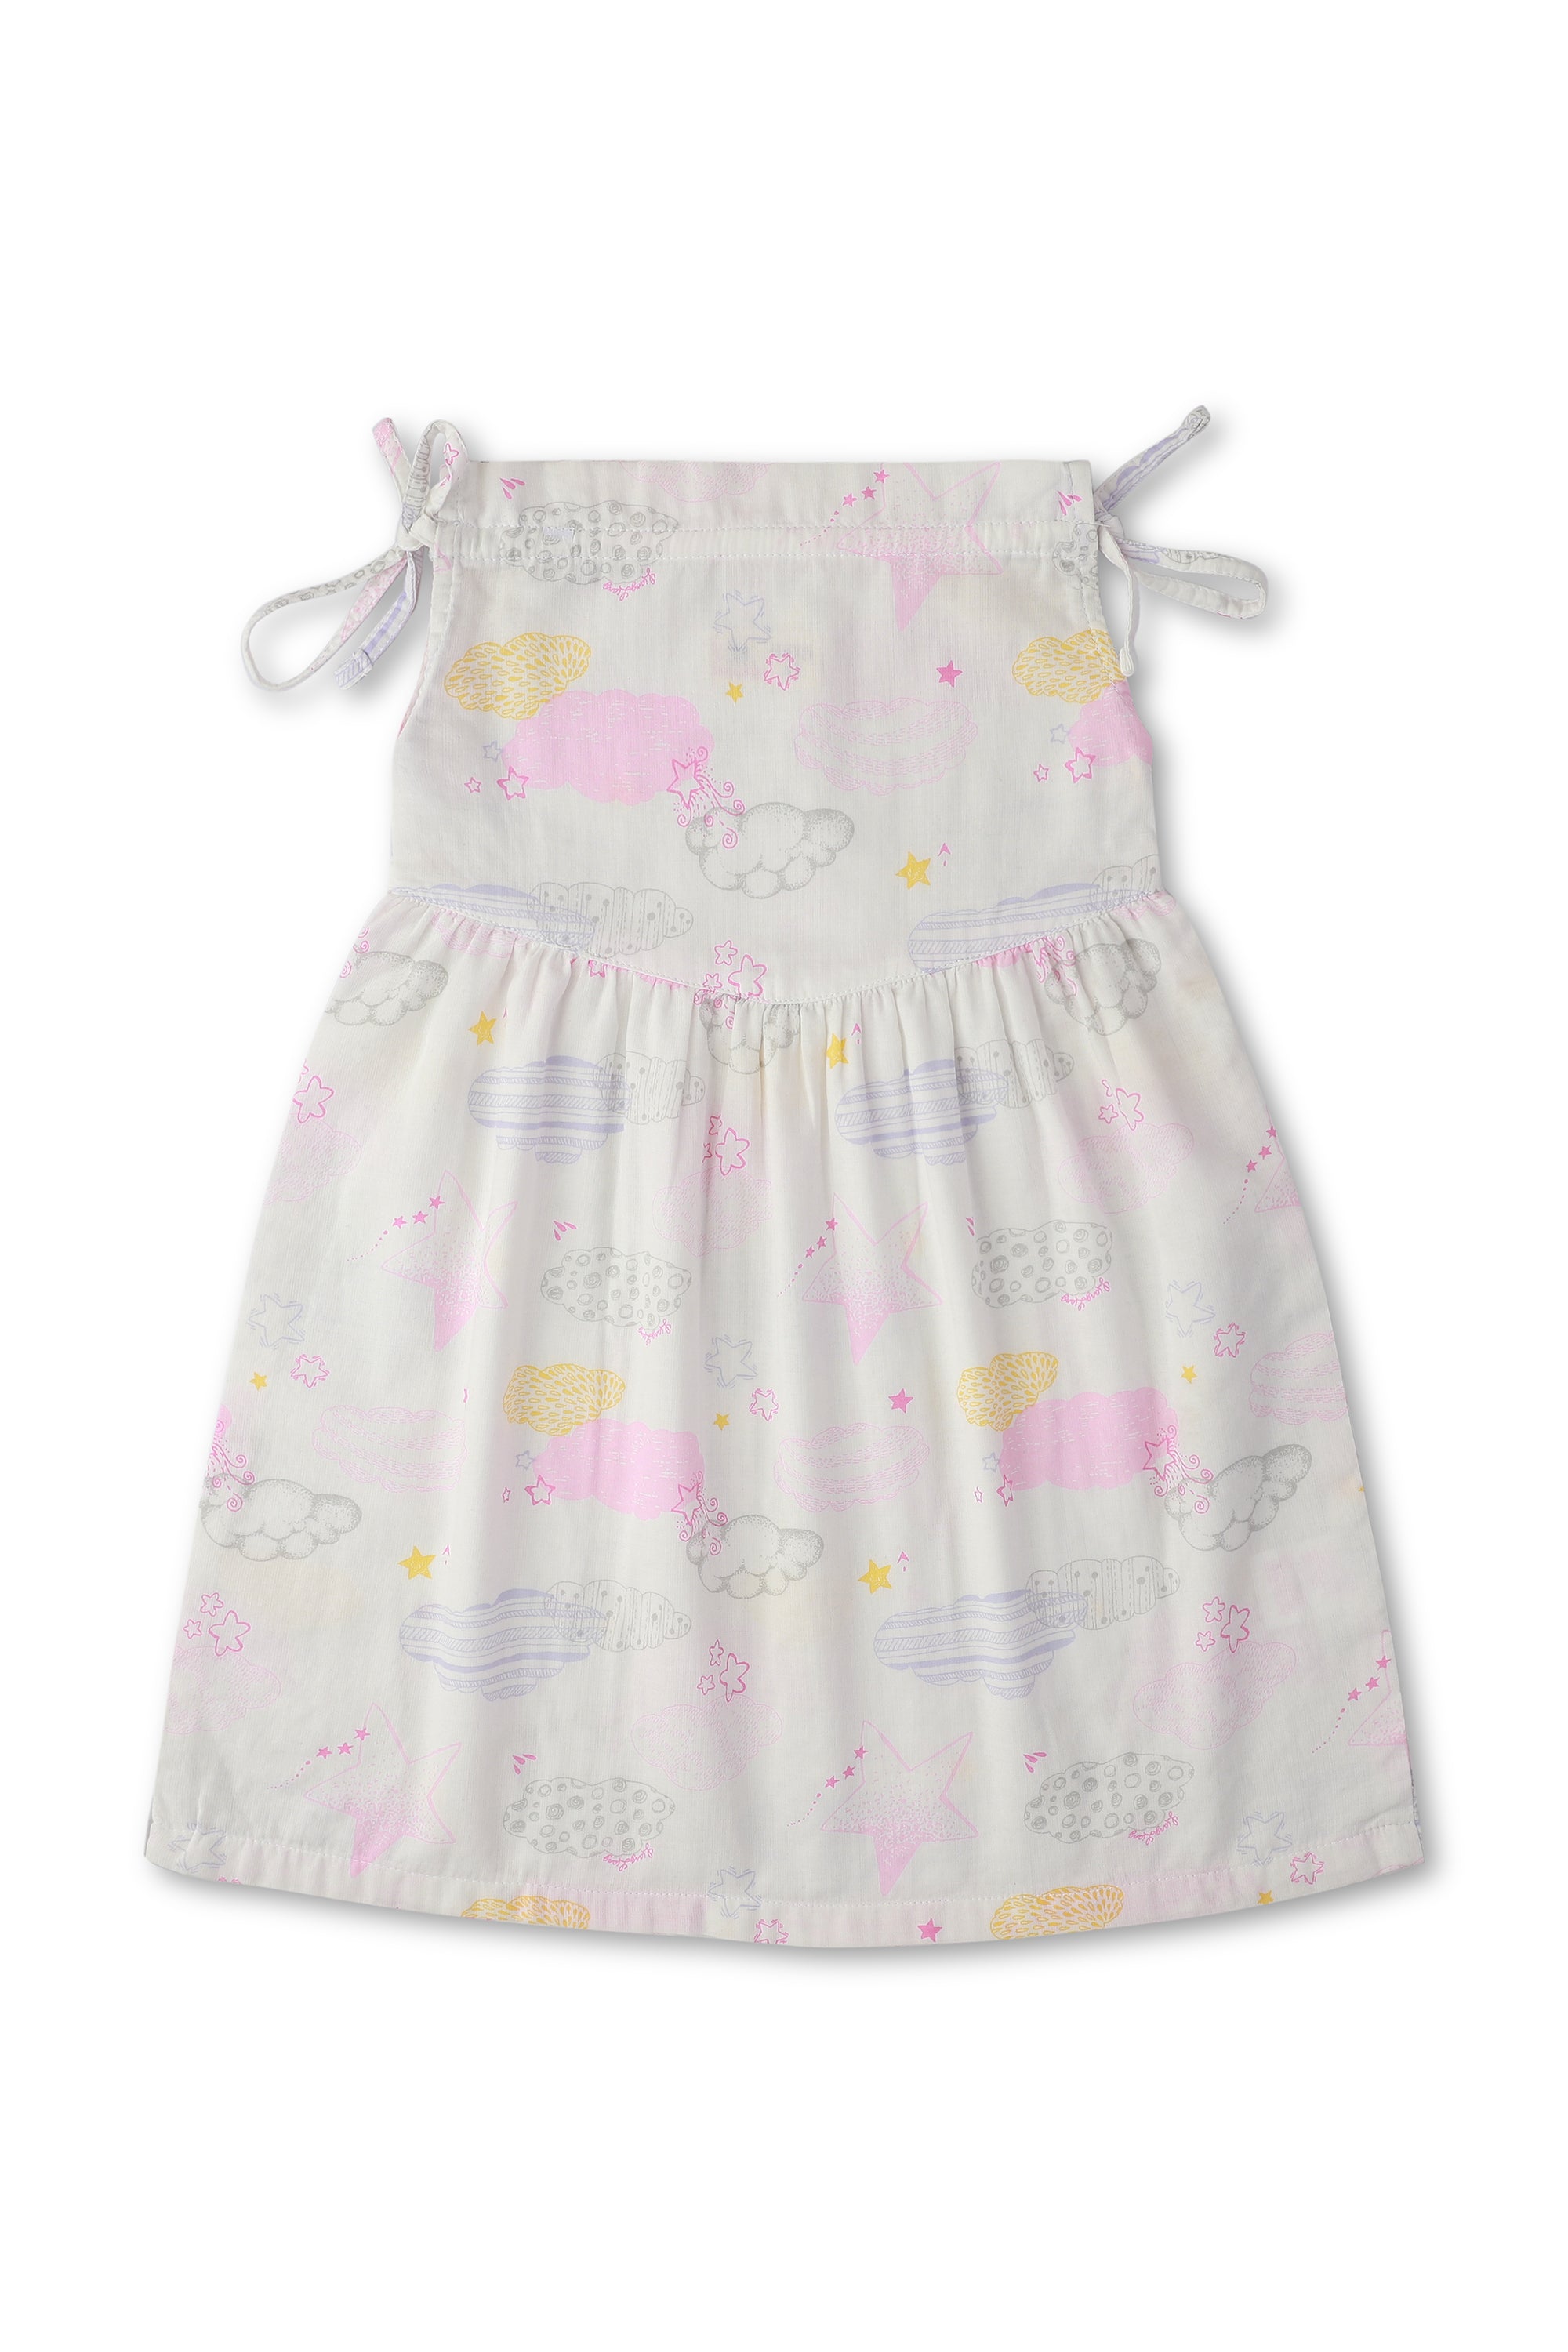 Clouds & Stars Printed Frock for Girls